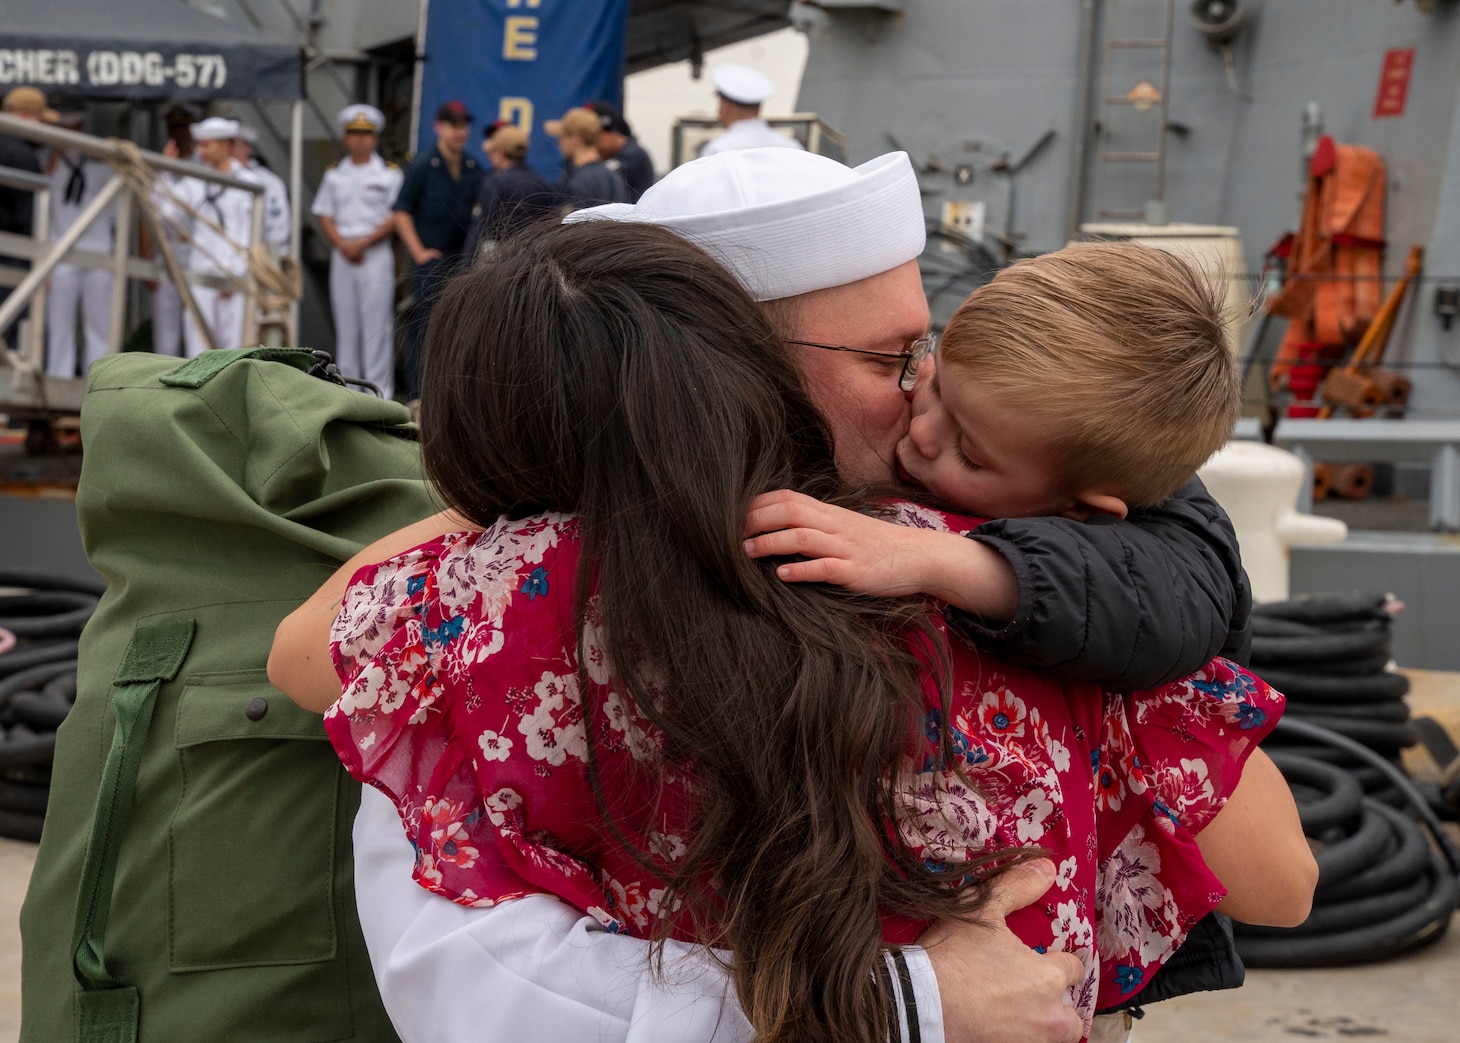 A Sailor assigned to the Arleigh Burke-class guided-missile destroyer USS Mitscher (DDG 57), embraces his family after the ship's return to homeport, Naval Station Norfolk, April 16.